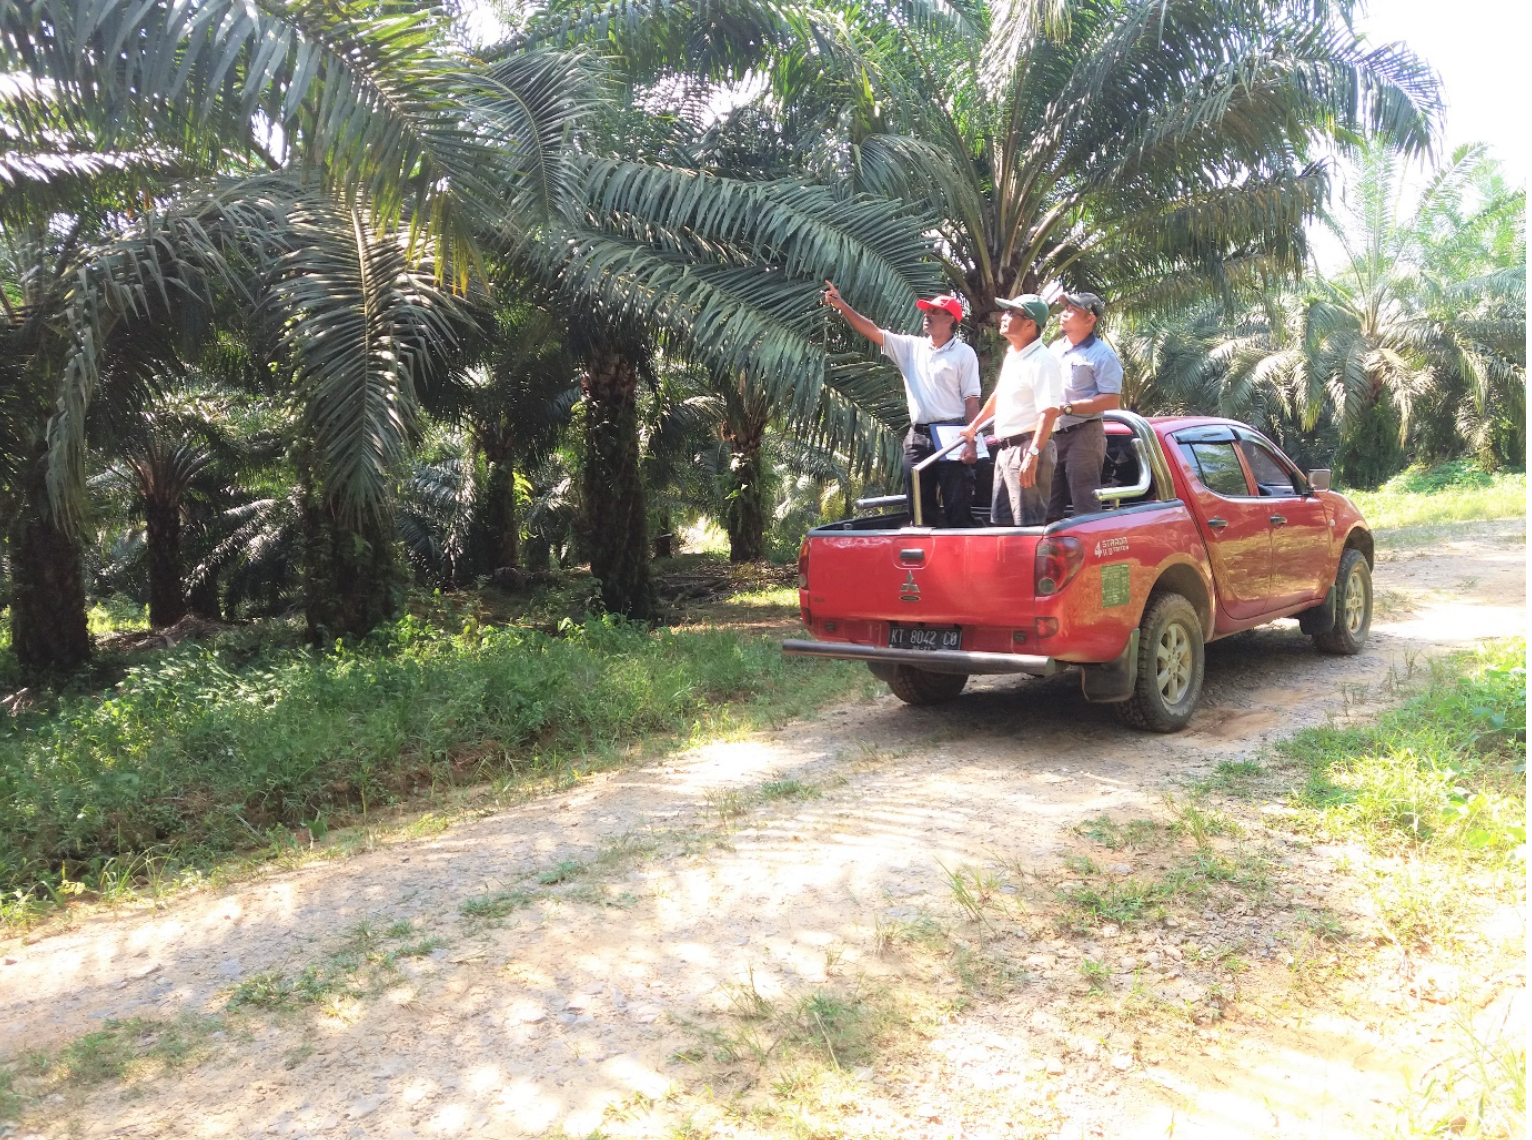   Manuring Advisory  – Field visit to determine nutritional status and nutrient deficiency symptoms of the oil palms. 